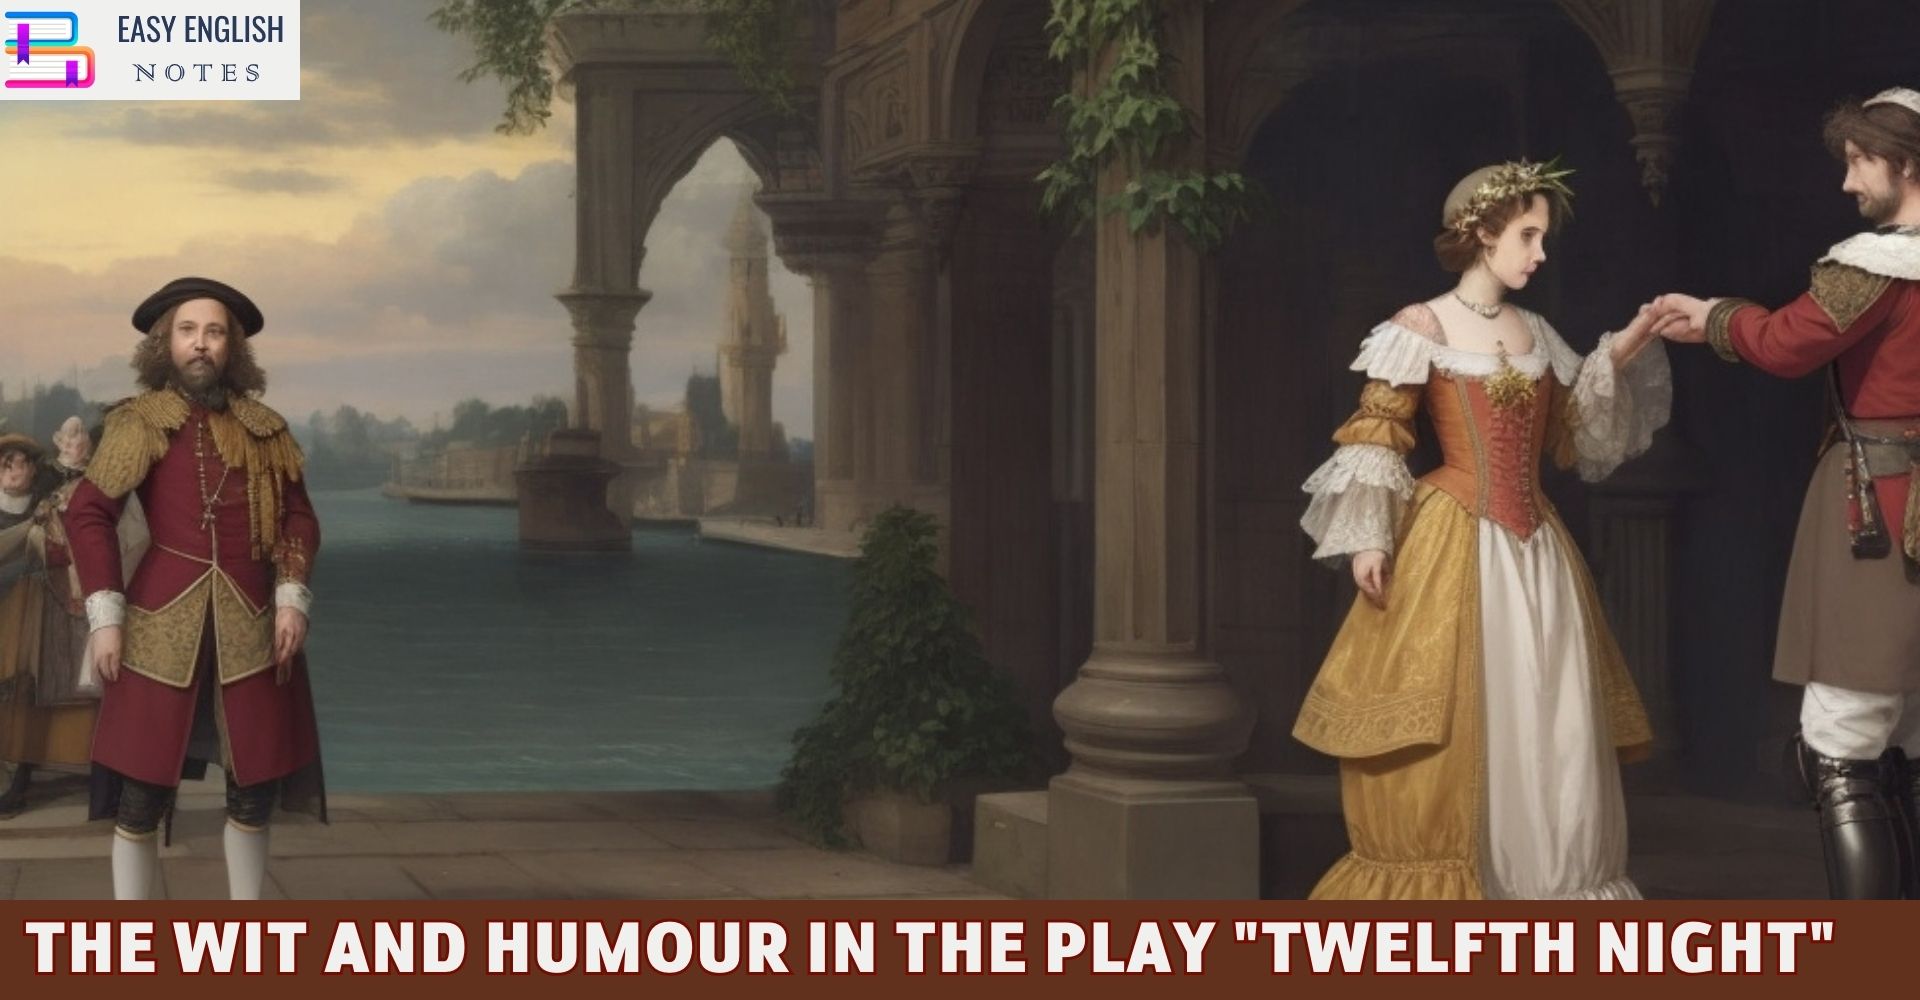 The Wit And Humour In The Play "Twelfth Night"